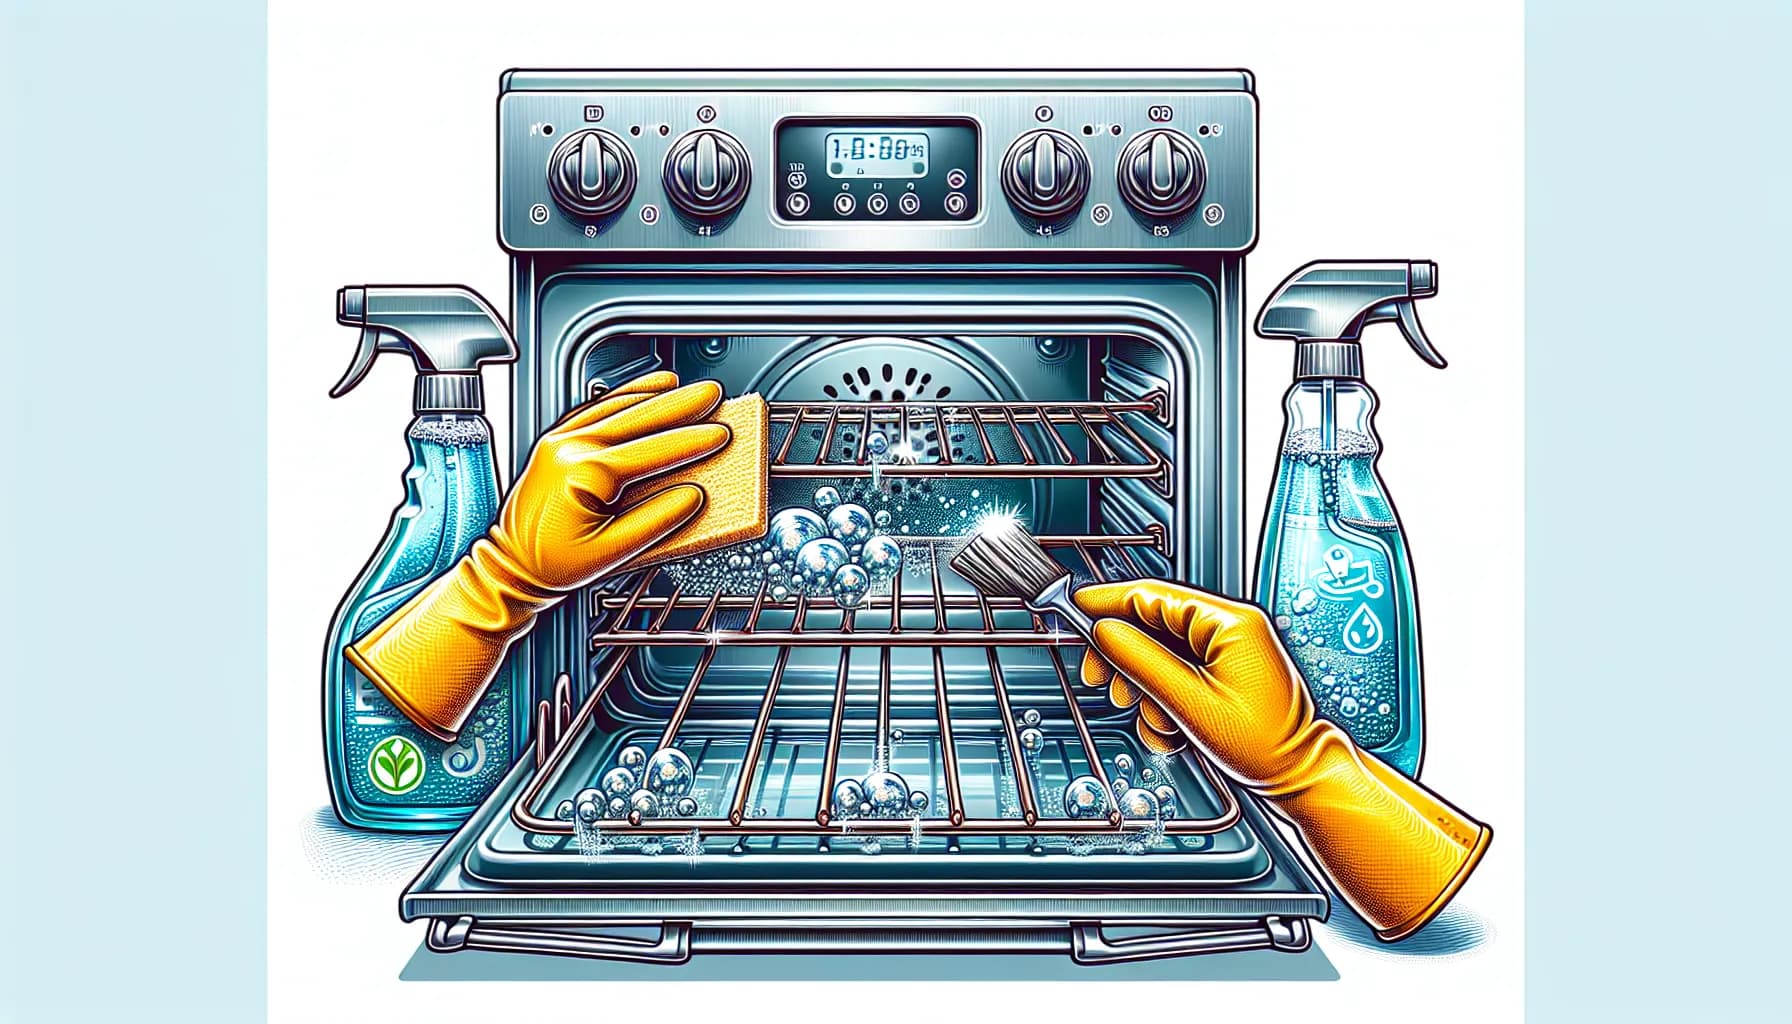 Clean, gleaming oven racks with bubbles, scrub brush, and eco-friendly cleaner. Best practices for cleaning oven racks.